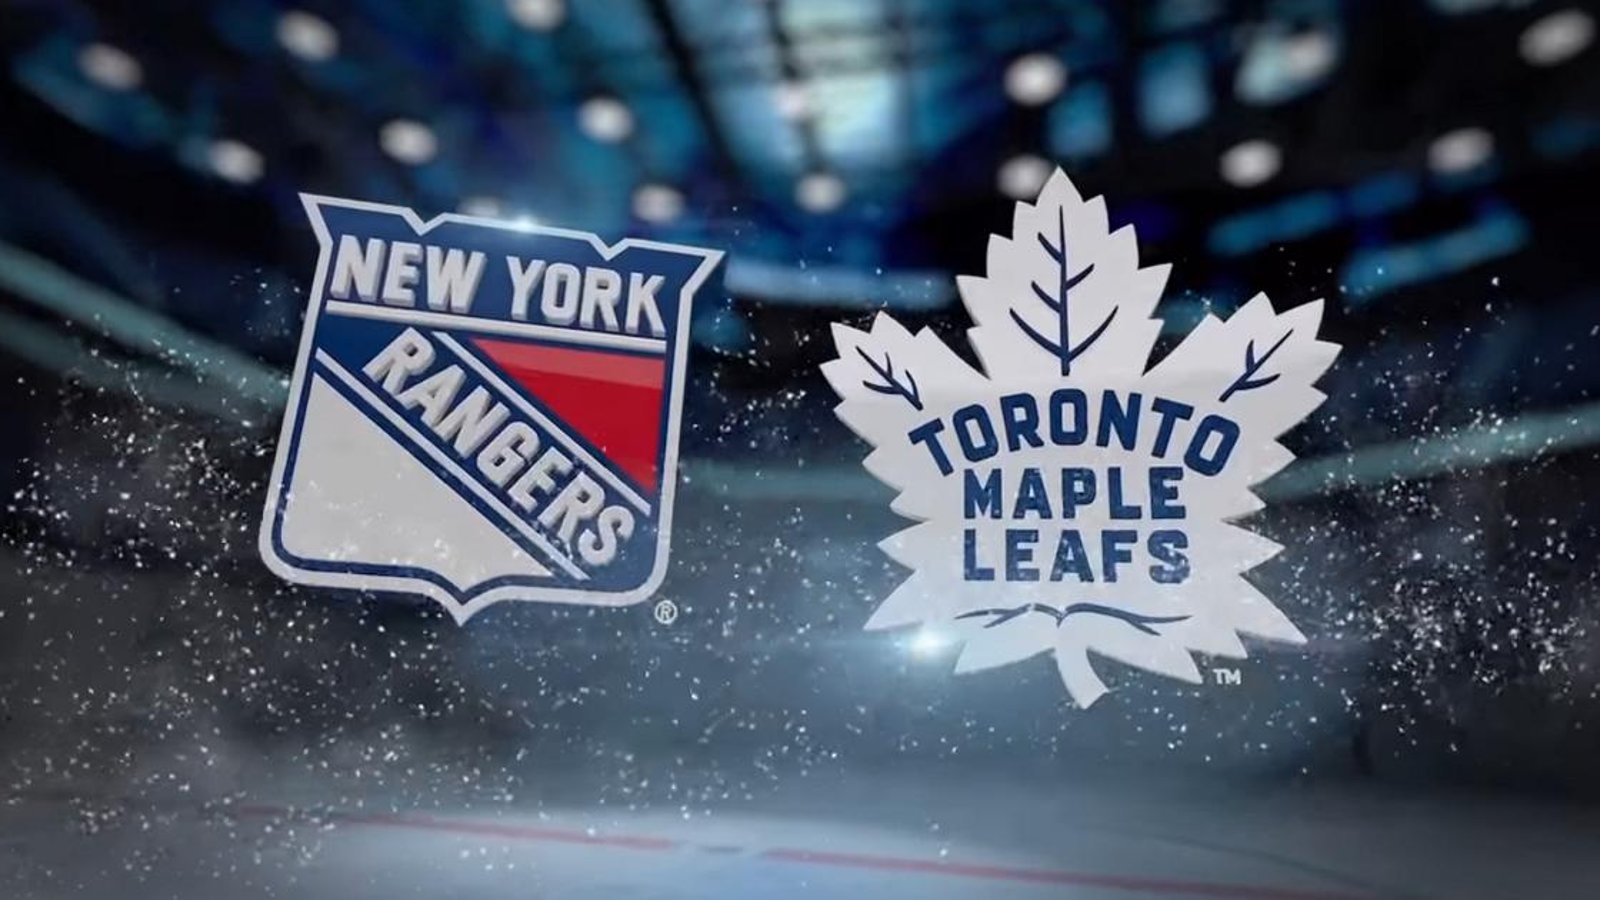 Rumors of a potential trade between the Leafs and Rangers. 